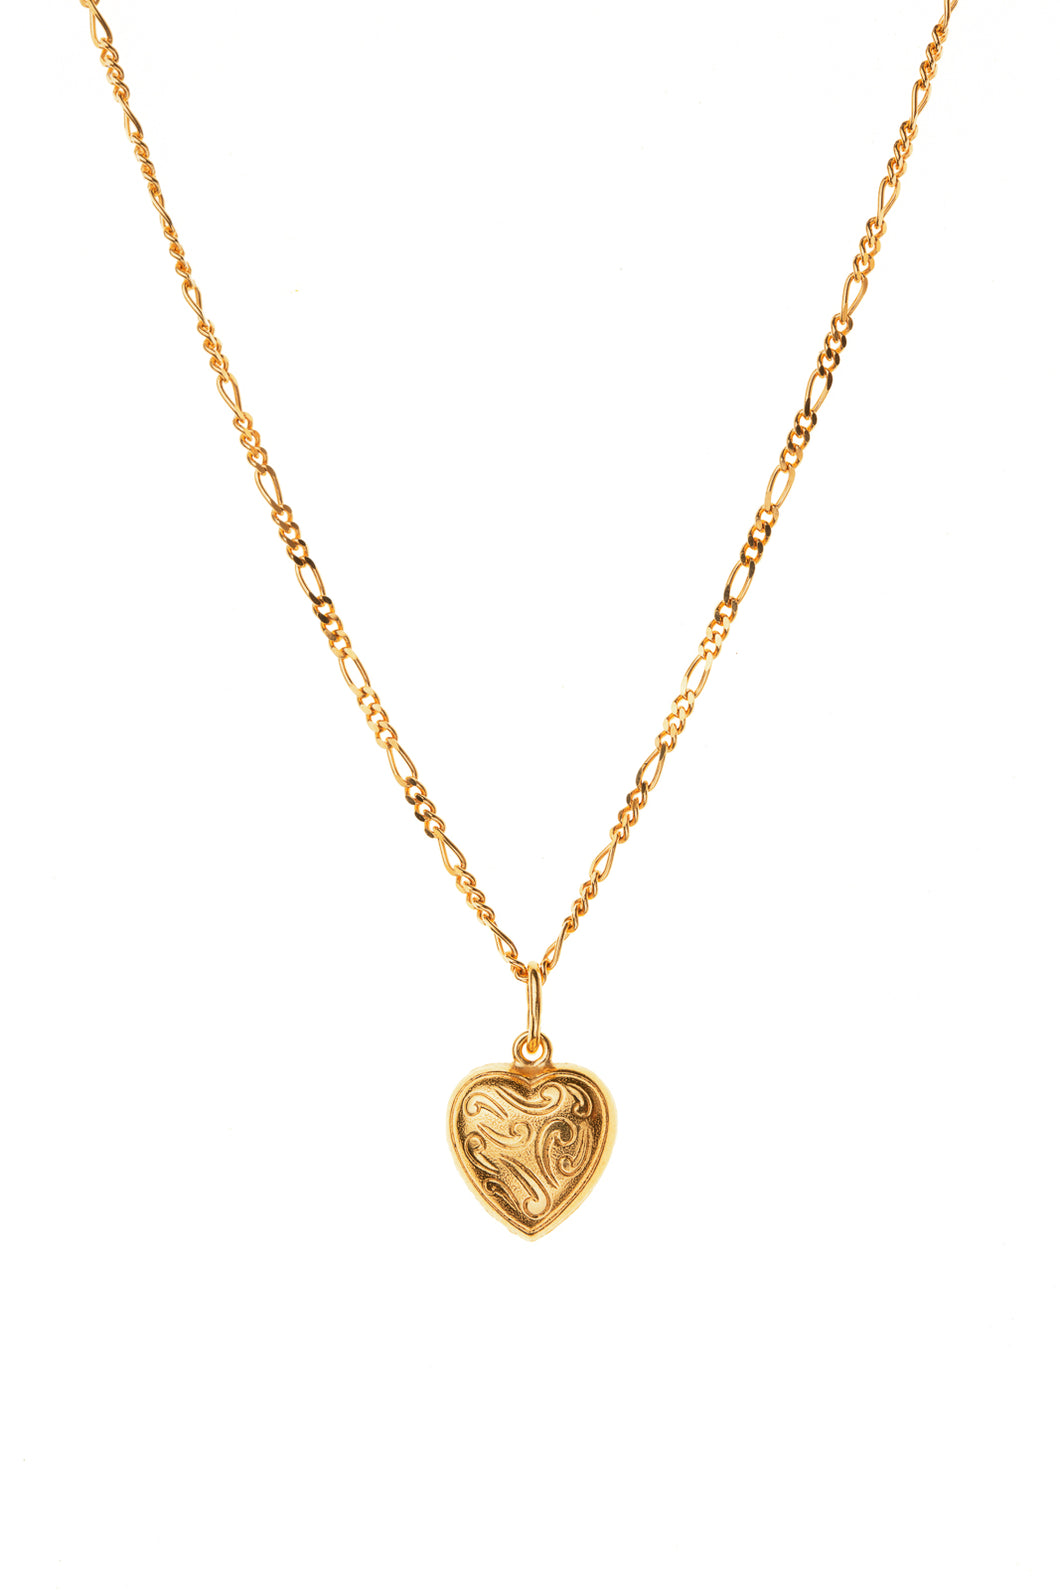 Gold Heart Border Charm Necklace